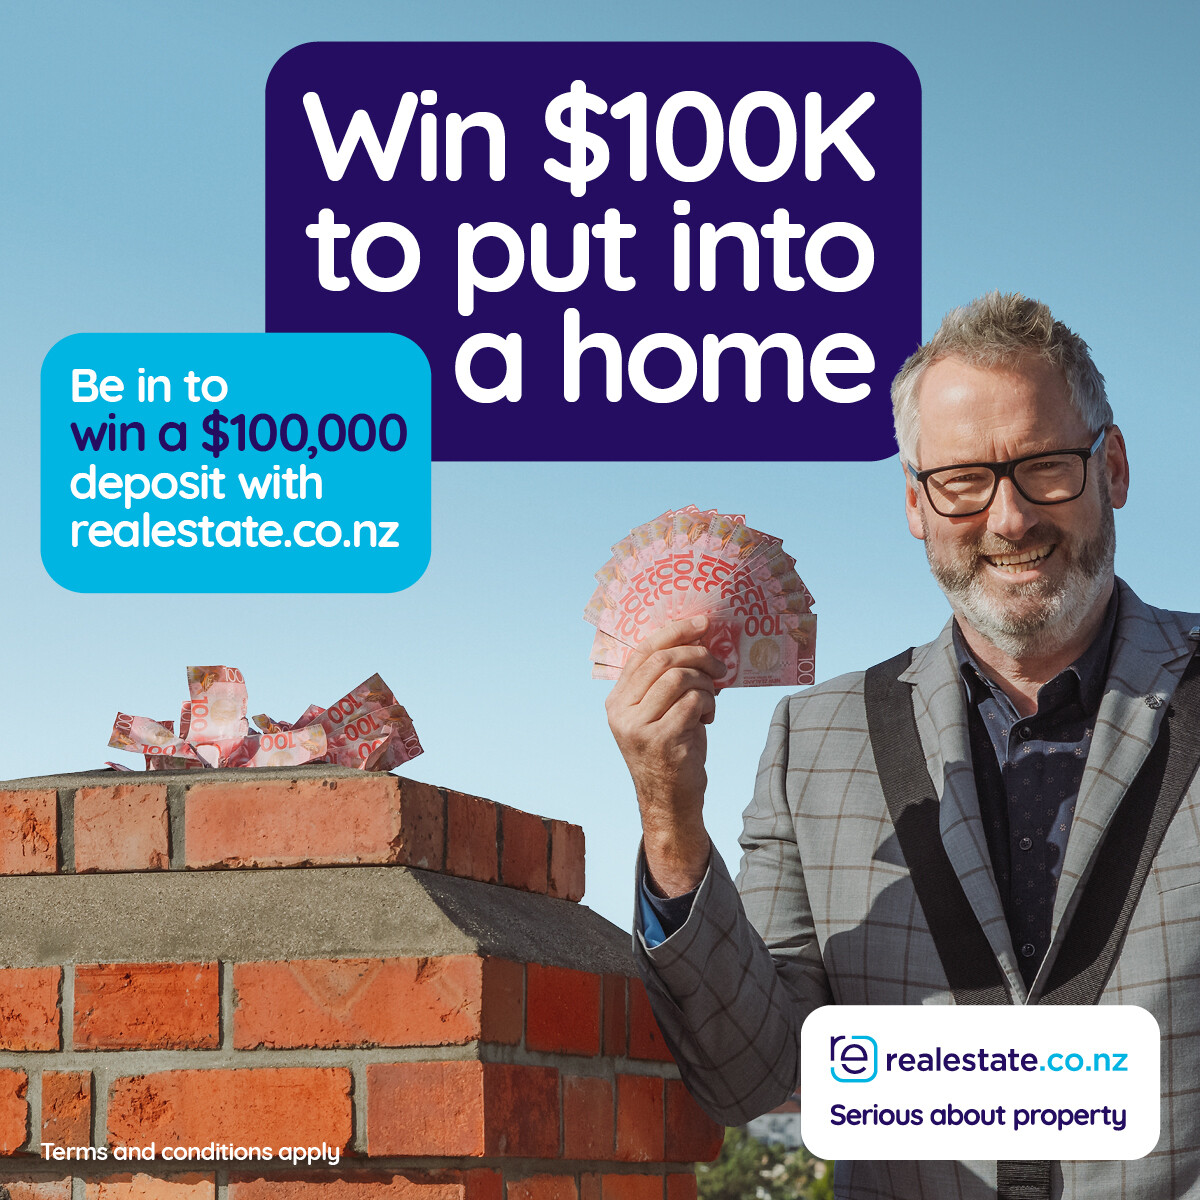 Our mates at realestate.co.nz are giving away $100k to one lucky Kiwi!